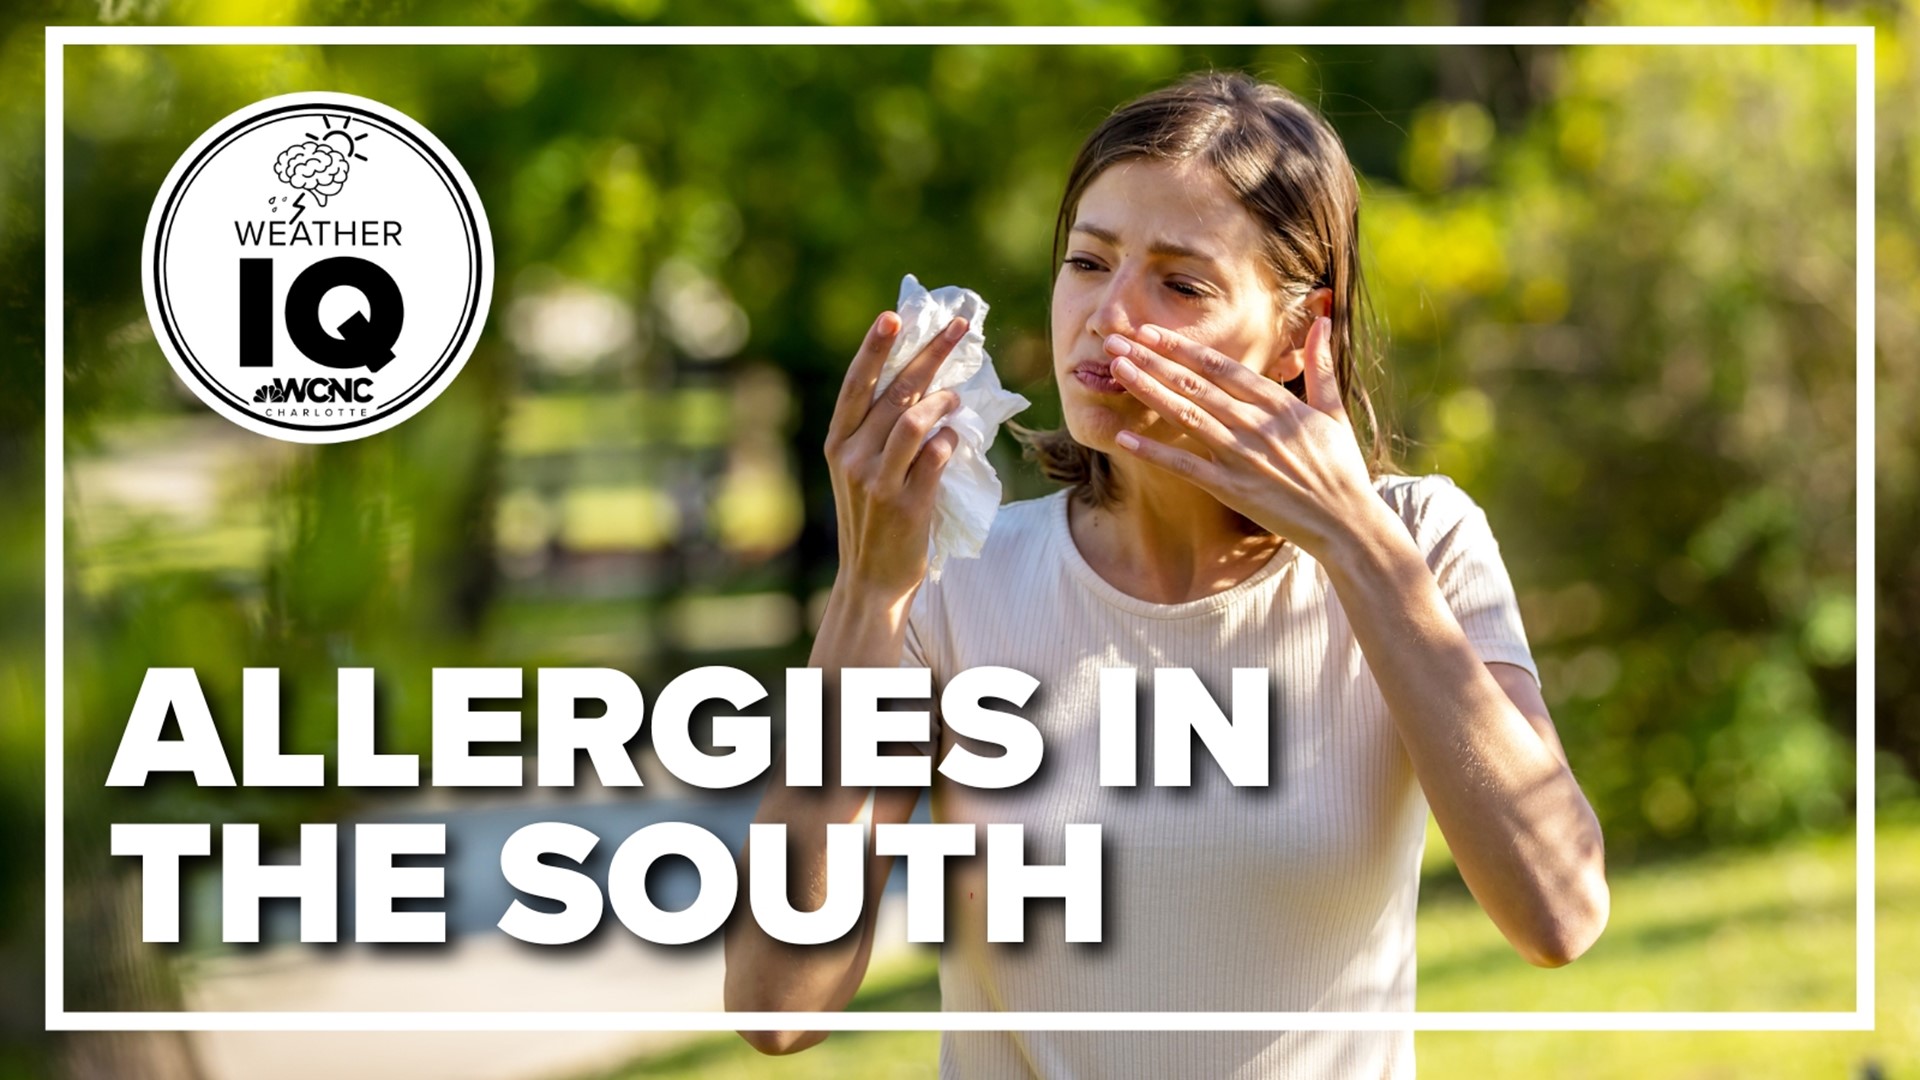 Why your allergies may be worse in the south.